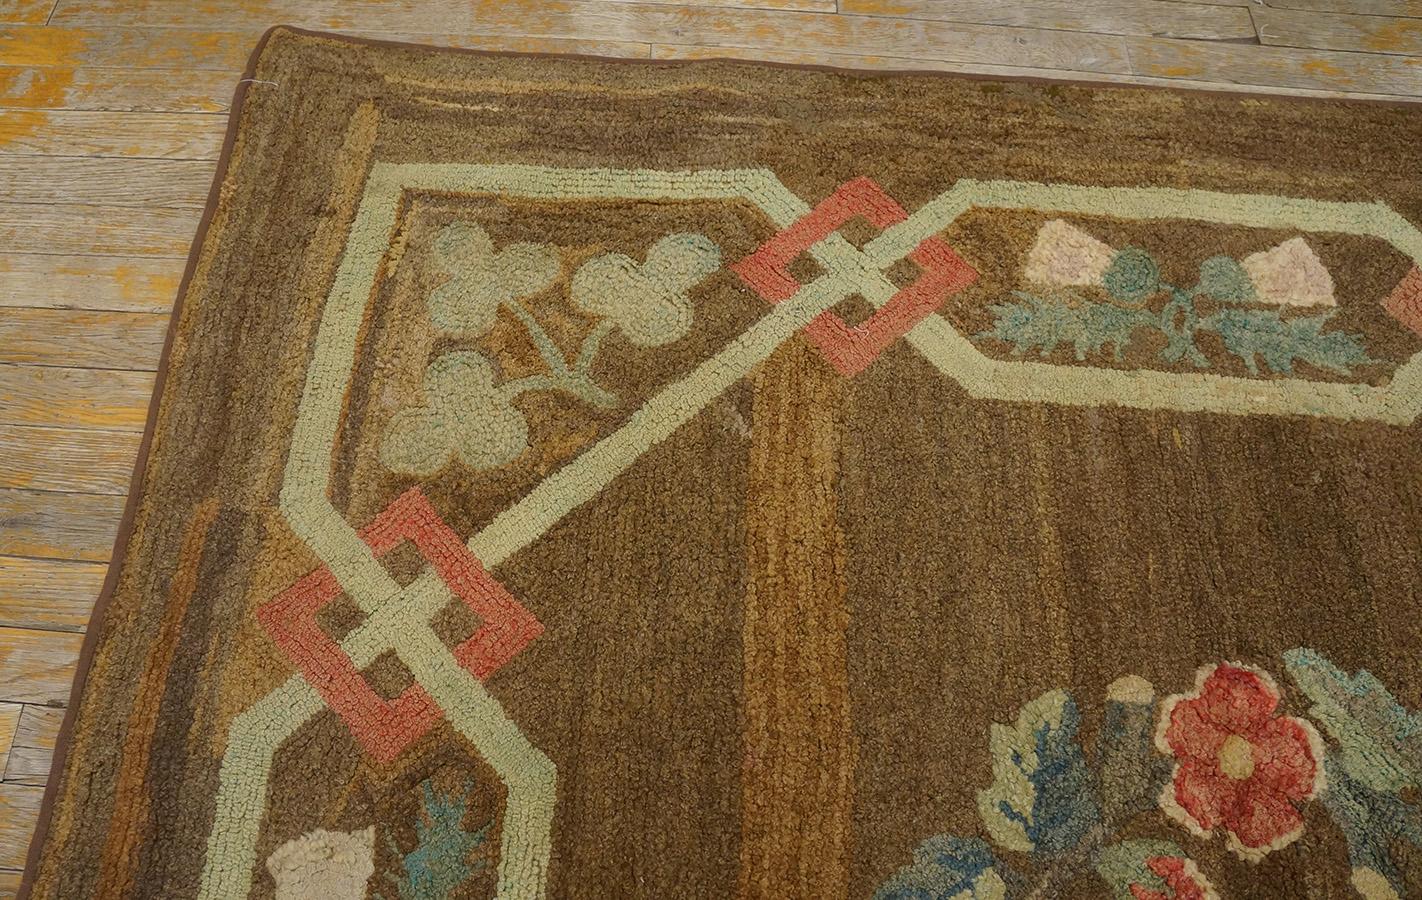 Early 20th Century American Hooked Rug ( 5' 9''x5' 10'' - 175 x 177 cm ) For Sale 7